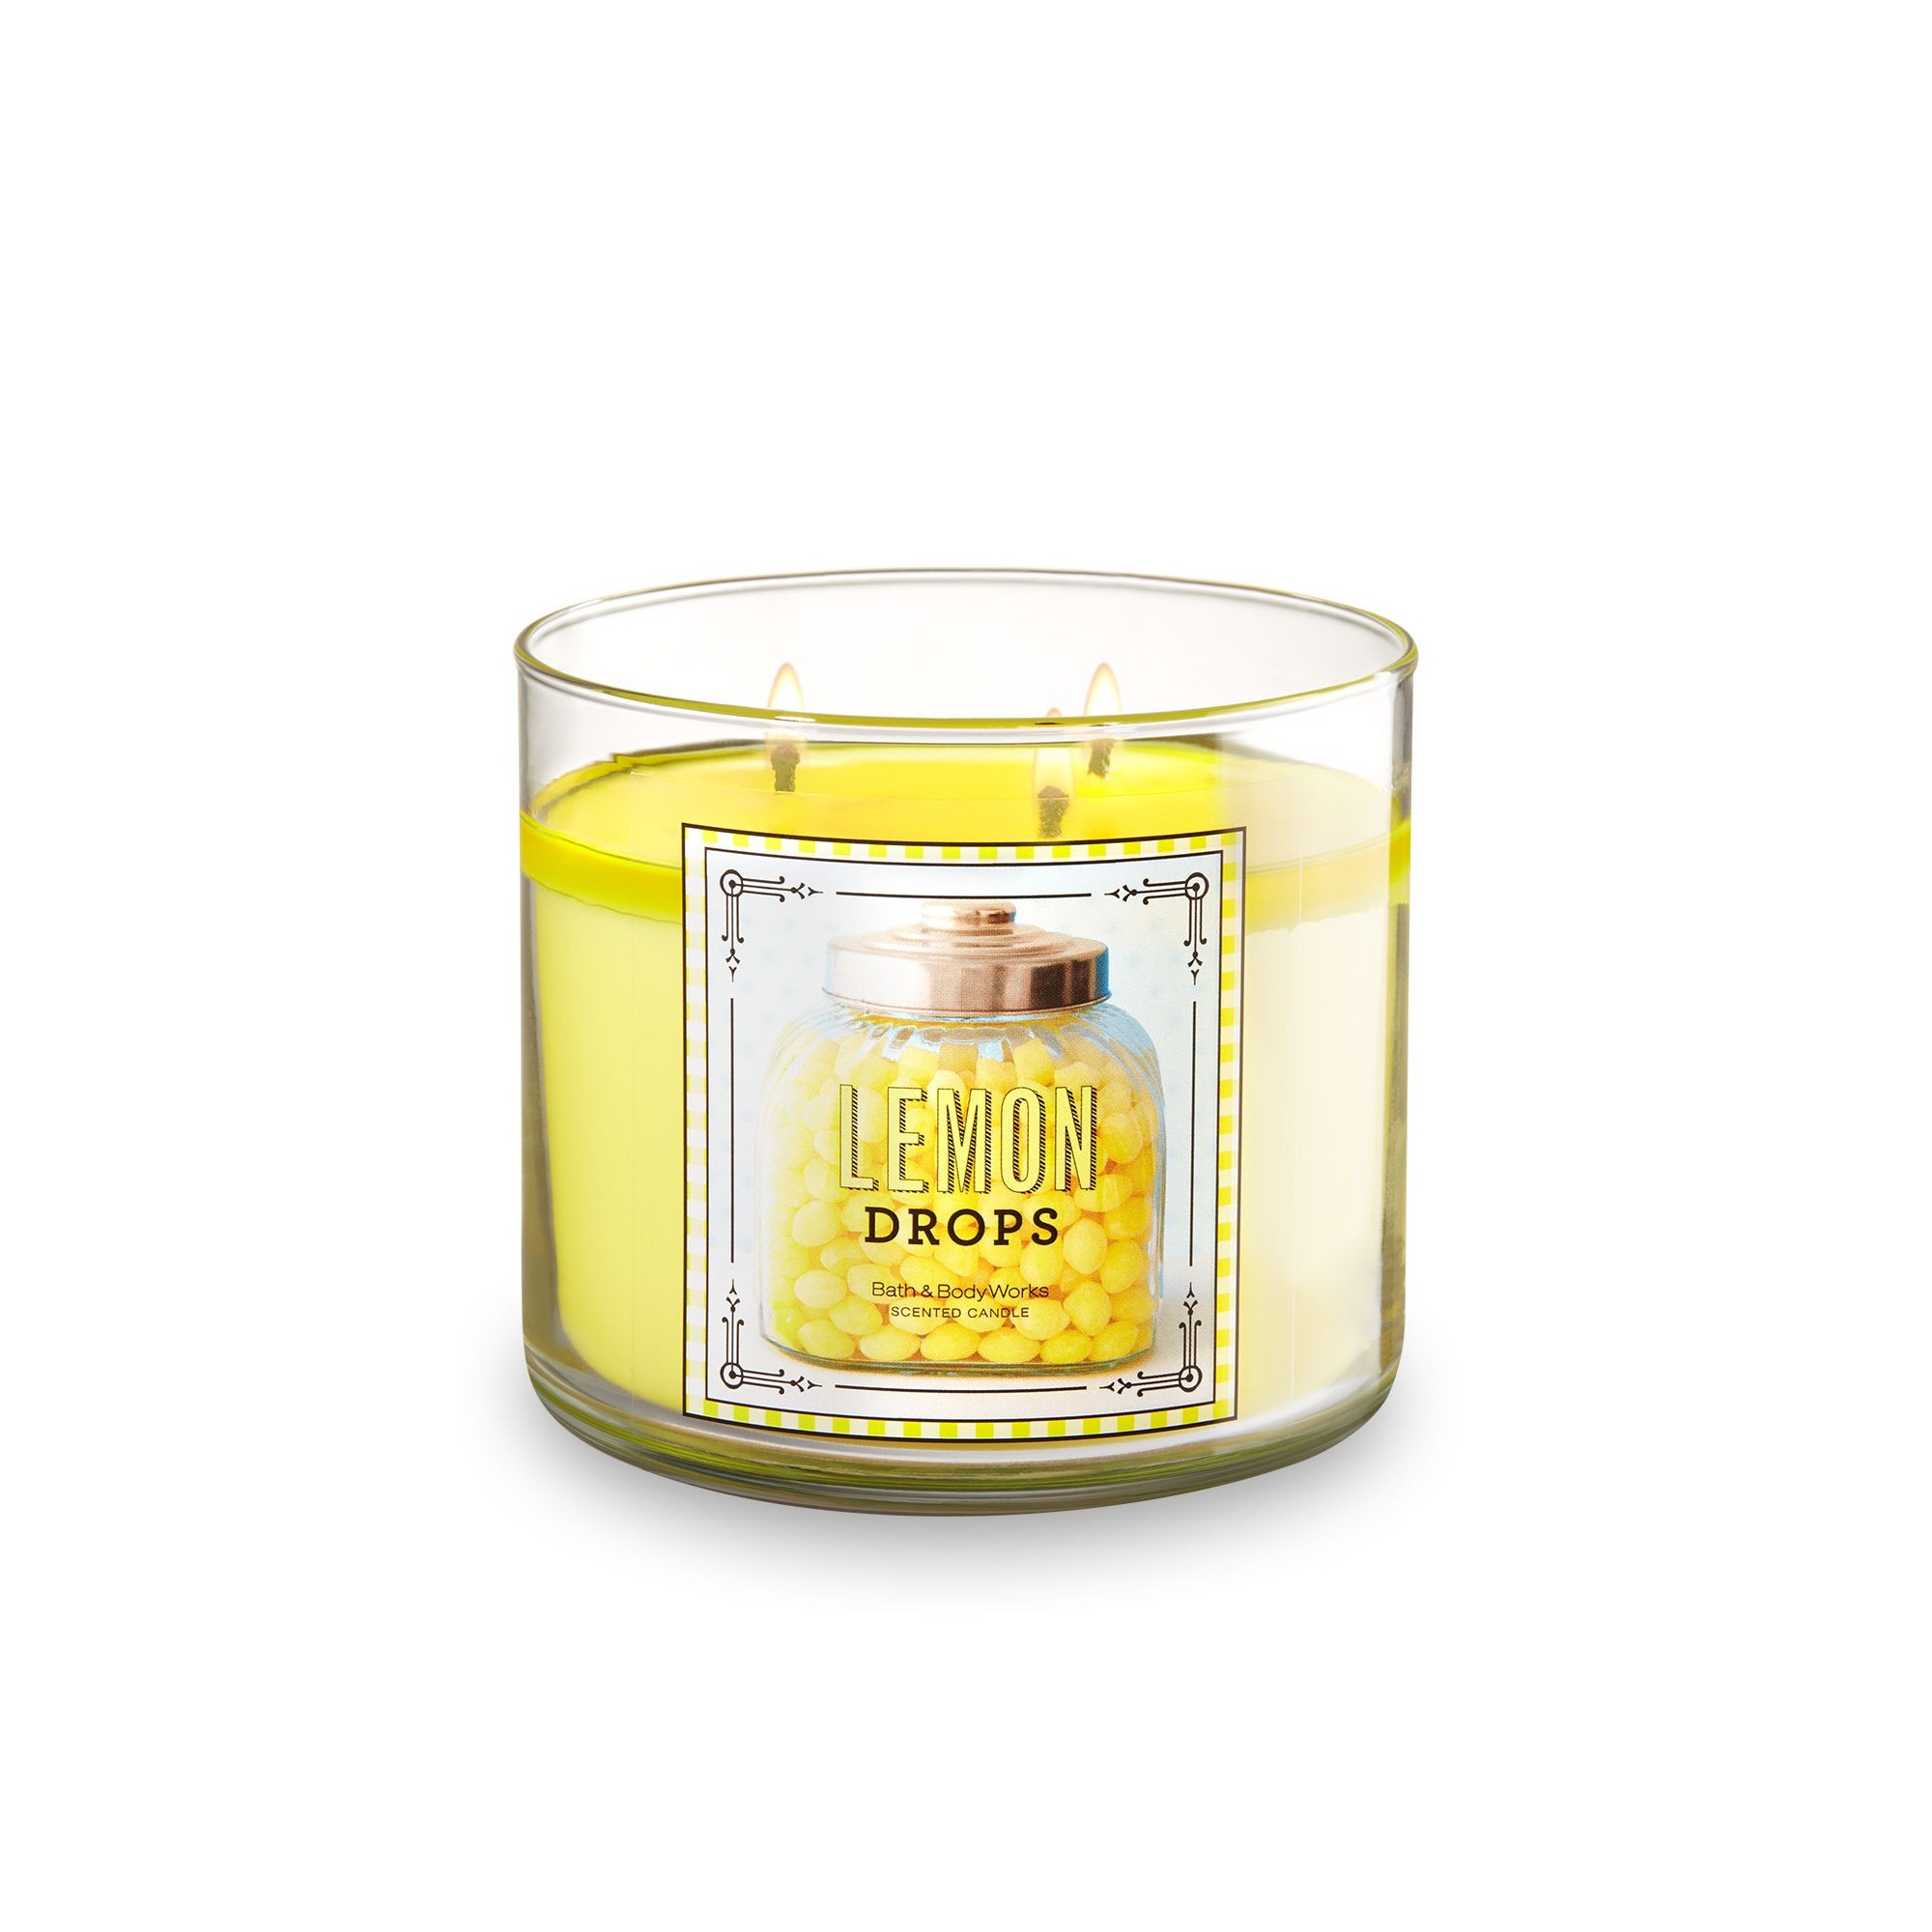 Bath & Body Works Lemon Drops 3 Wick Scented Candle